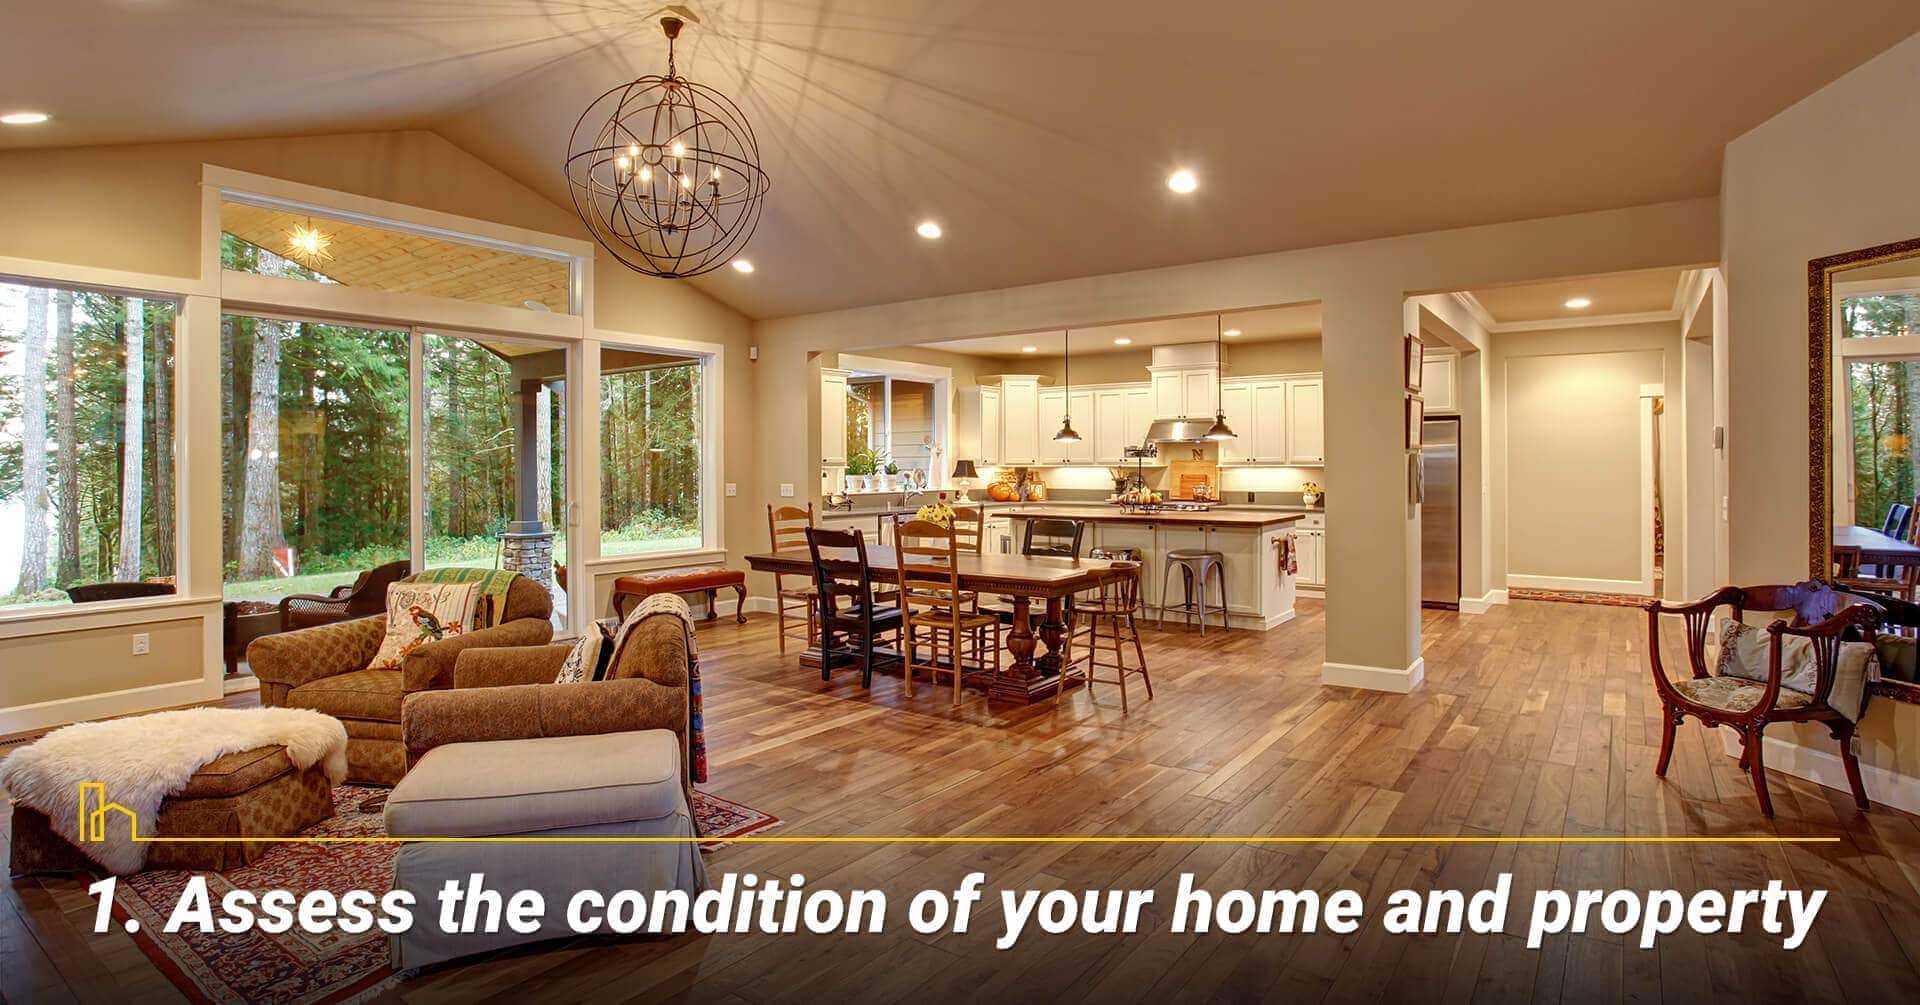 Assess the condition of your home and property, review the condition of your home